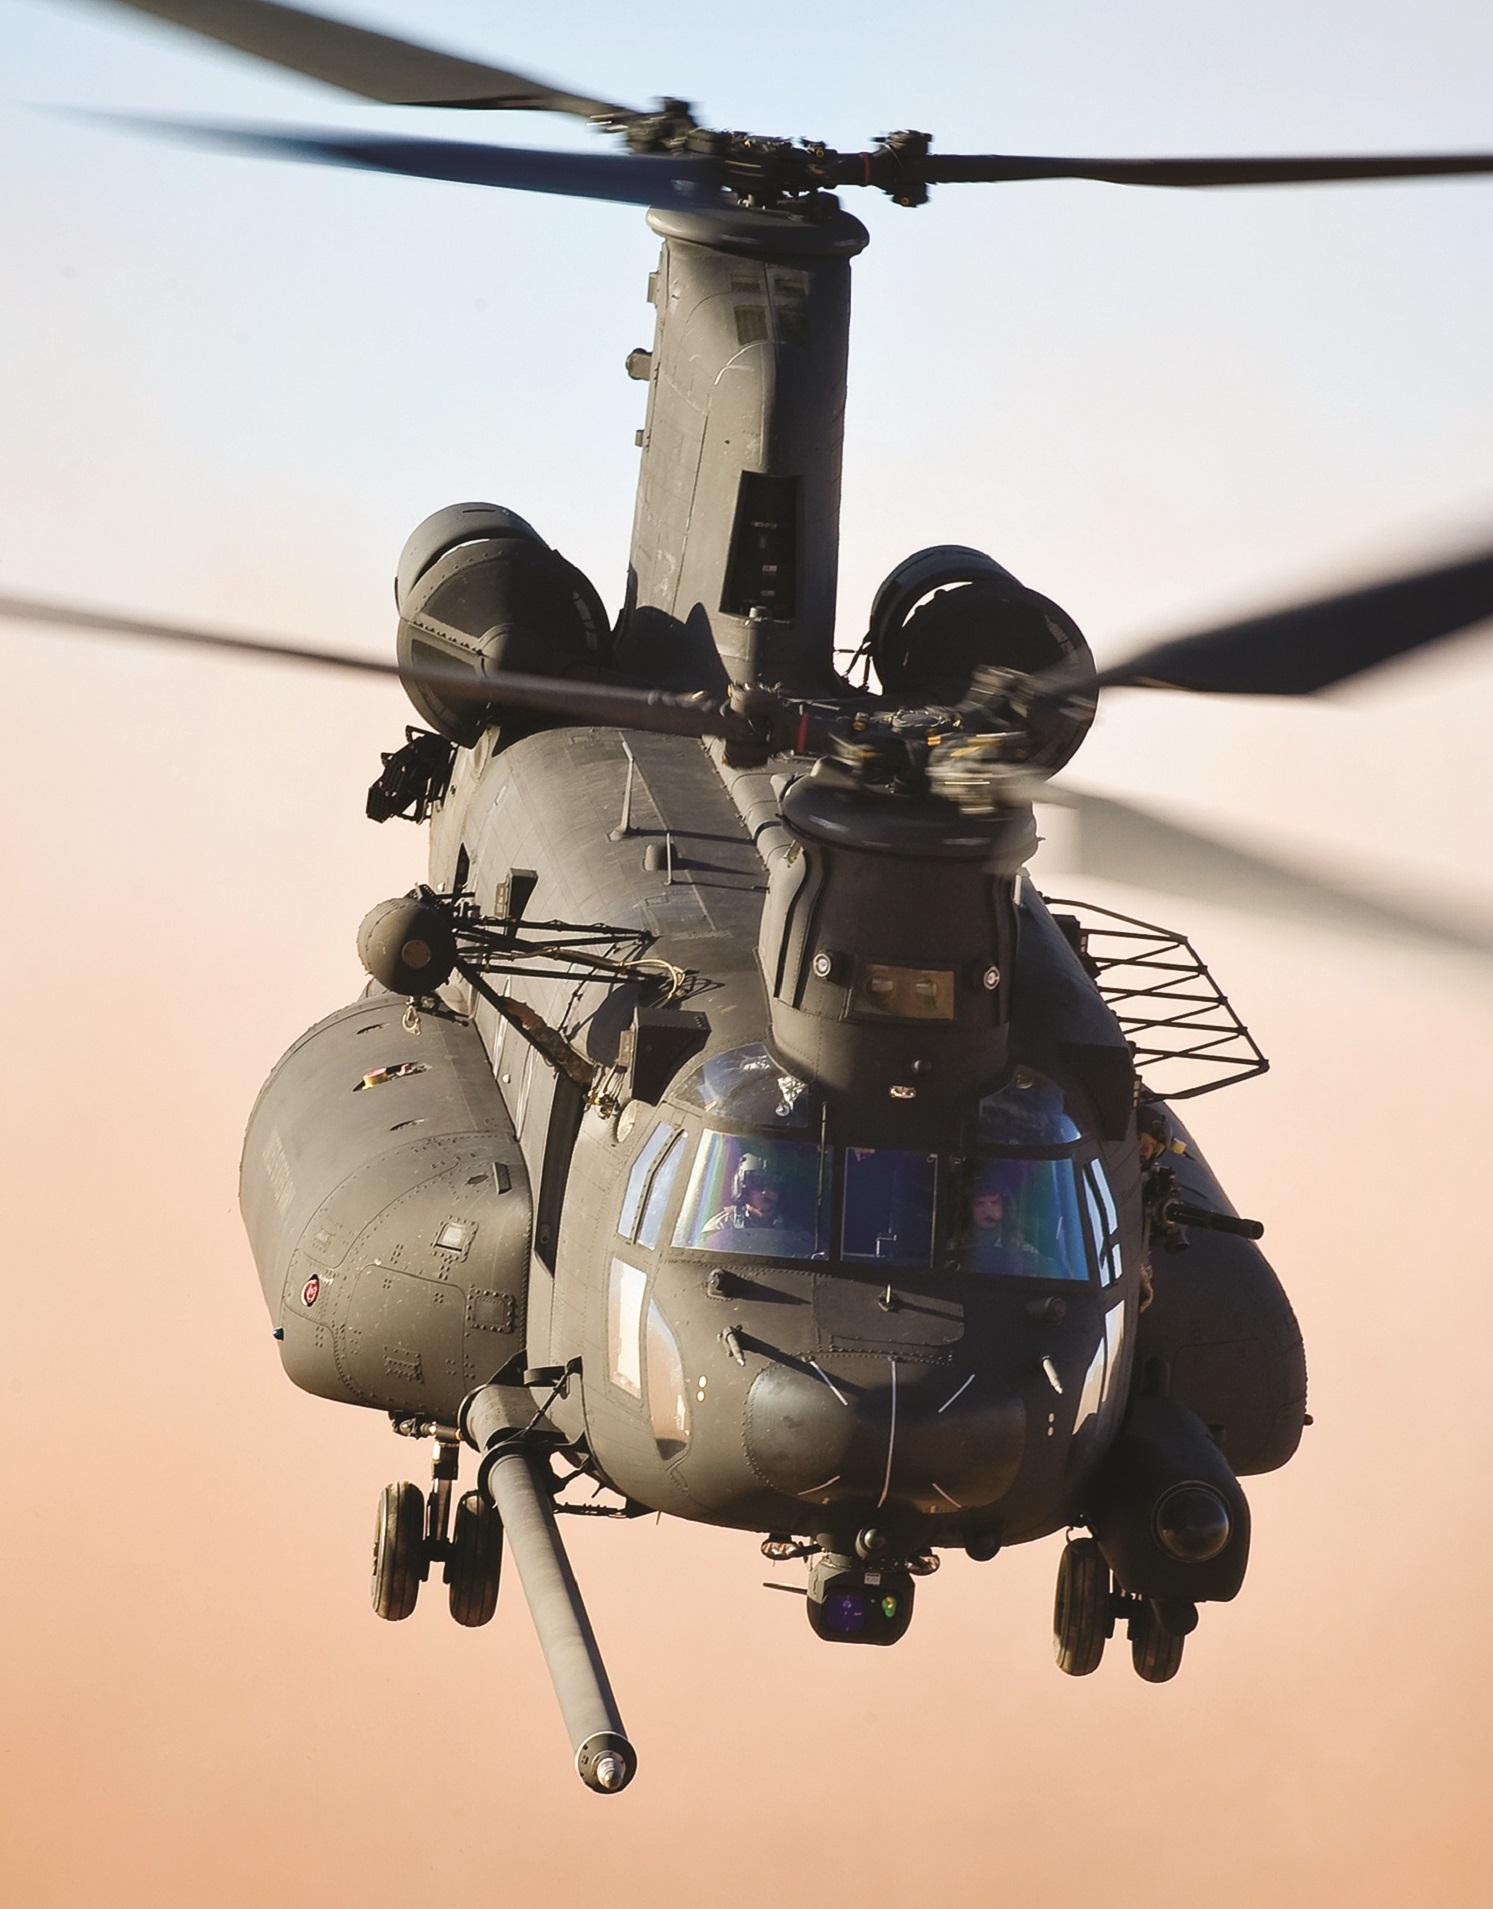 Boeing has confirmed that it will build next-generation MH-47G Chinooks for the U.S. Army Special Operations Aviation Command.. Click to enlarge.